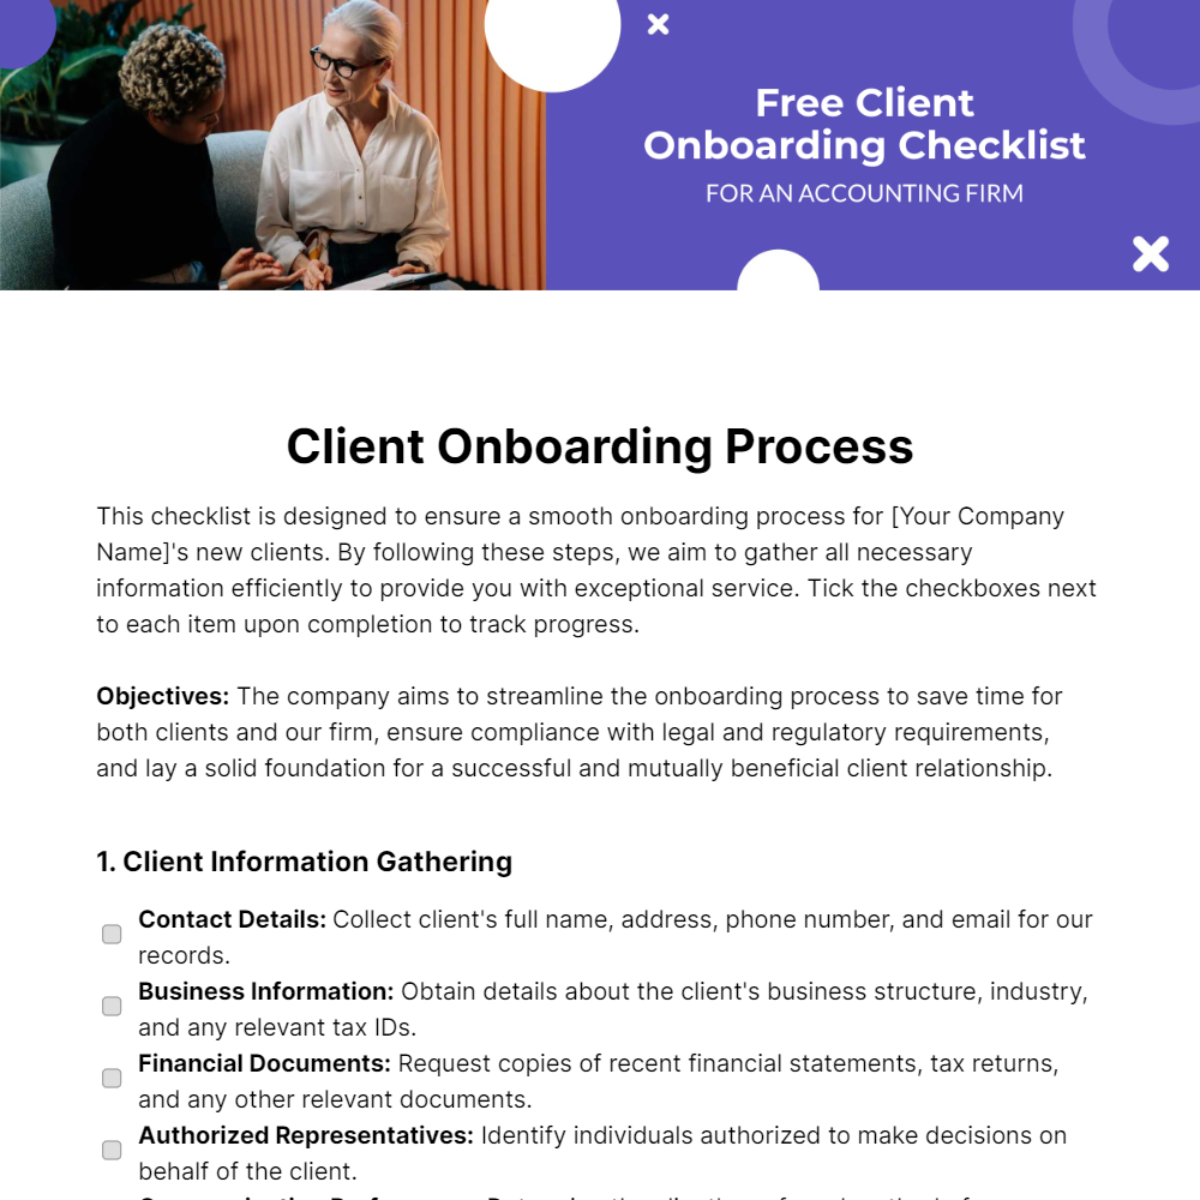 Client Onboarding Checklist for an Accounting Firm Template